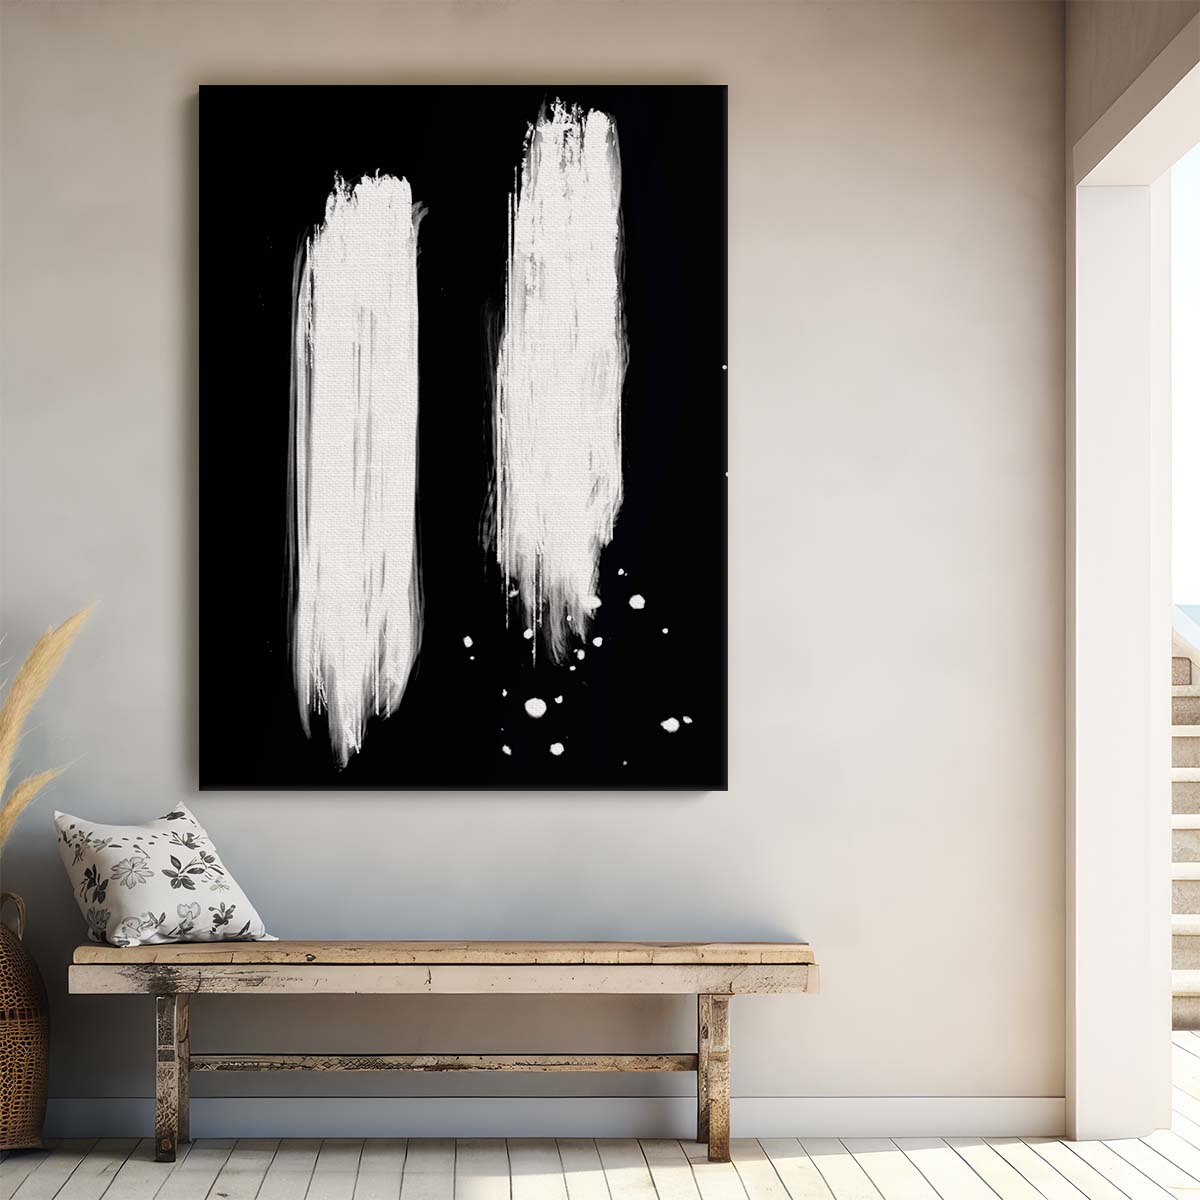 Monochrome Geometric Abstract Illustration Painting with Brush Strokes by Luxuriance Designs, made in USA